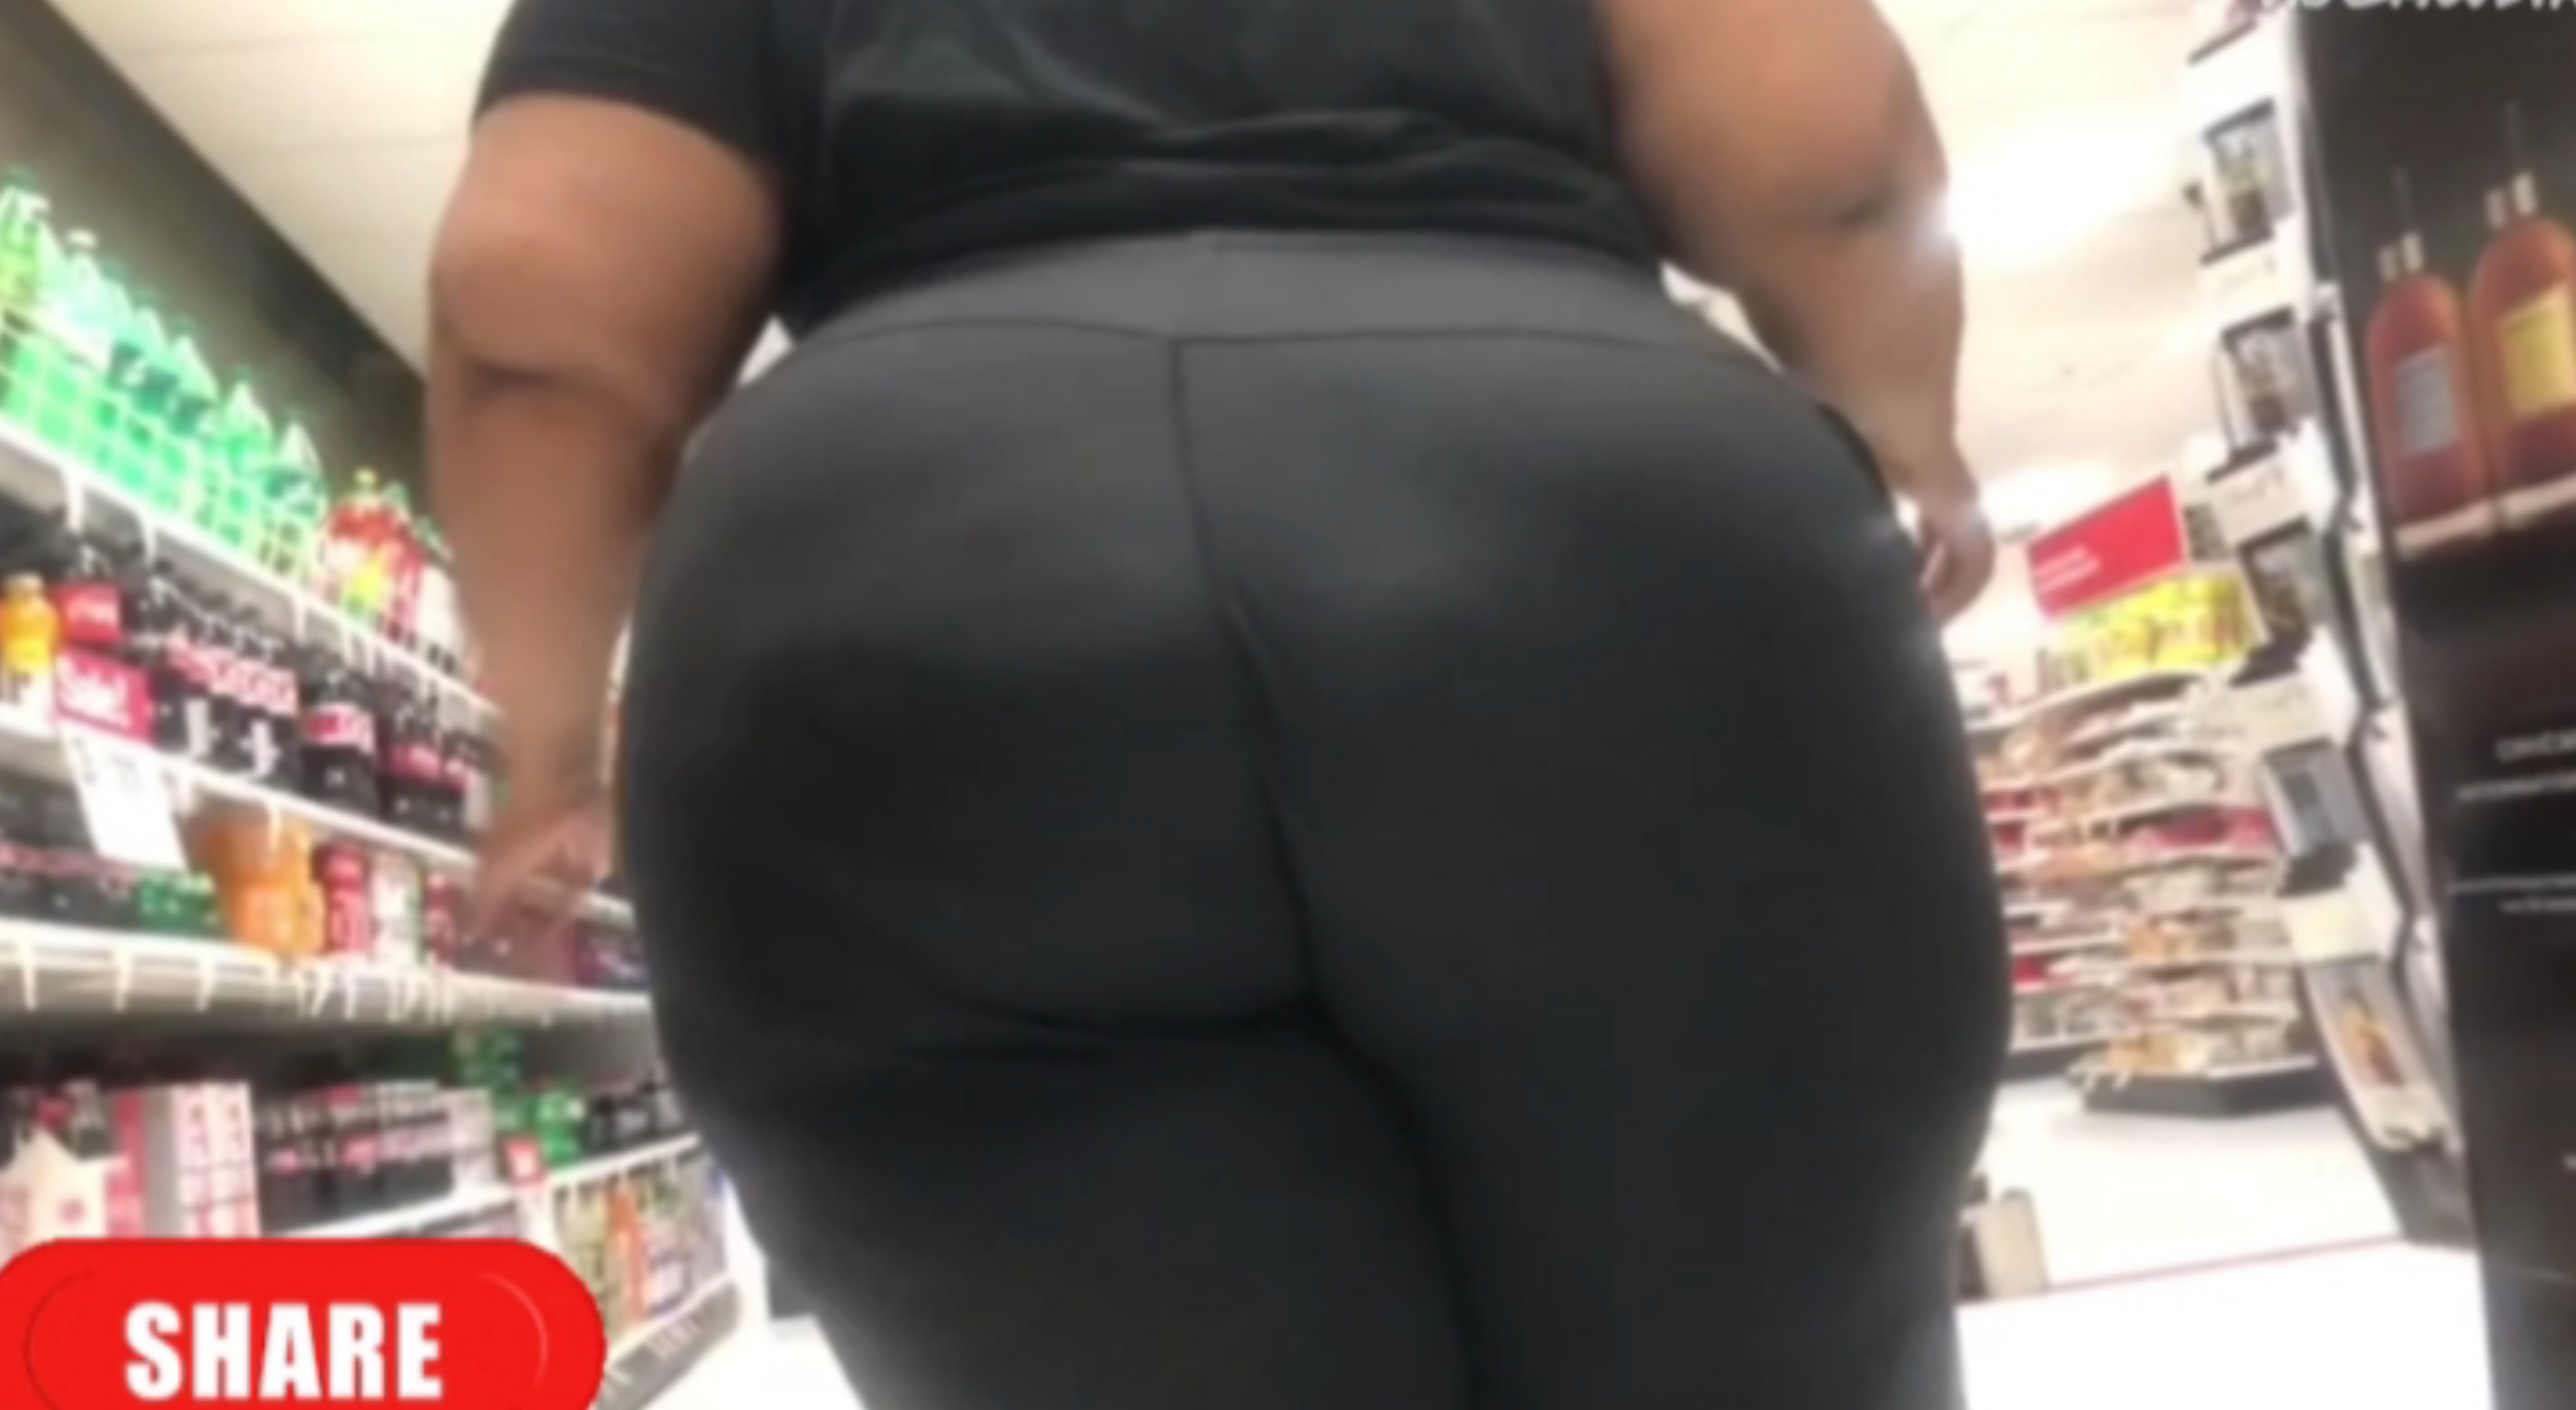 DONKZILLA SHOPPING CURVES CANDID CAPTURE